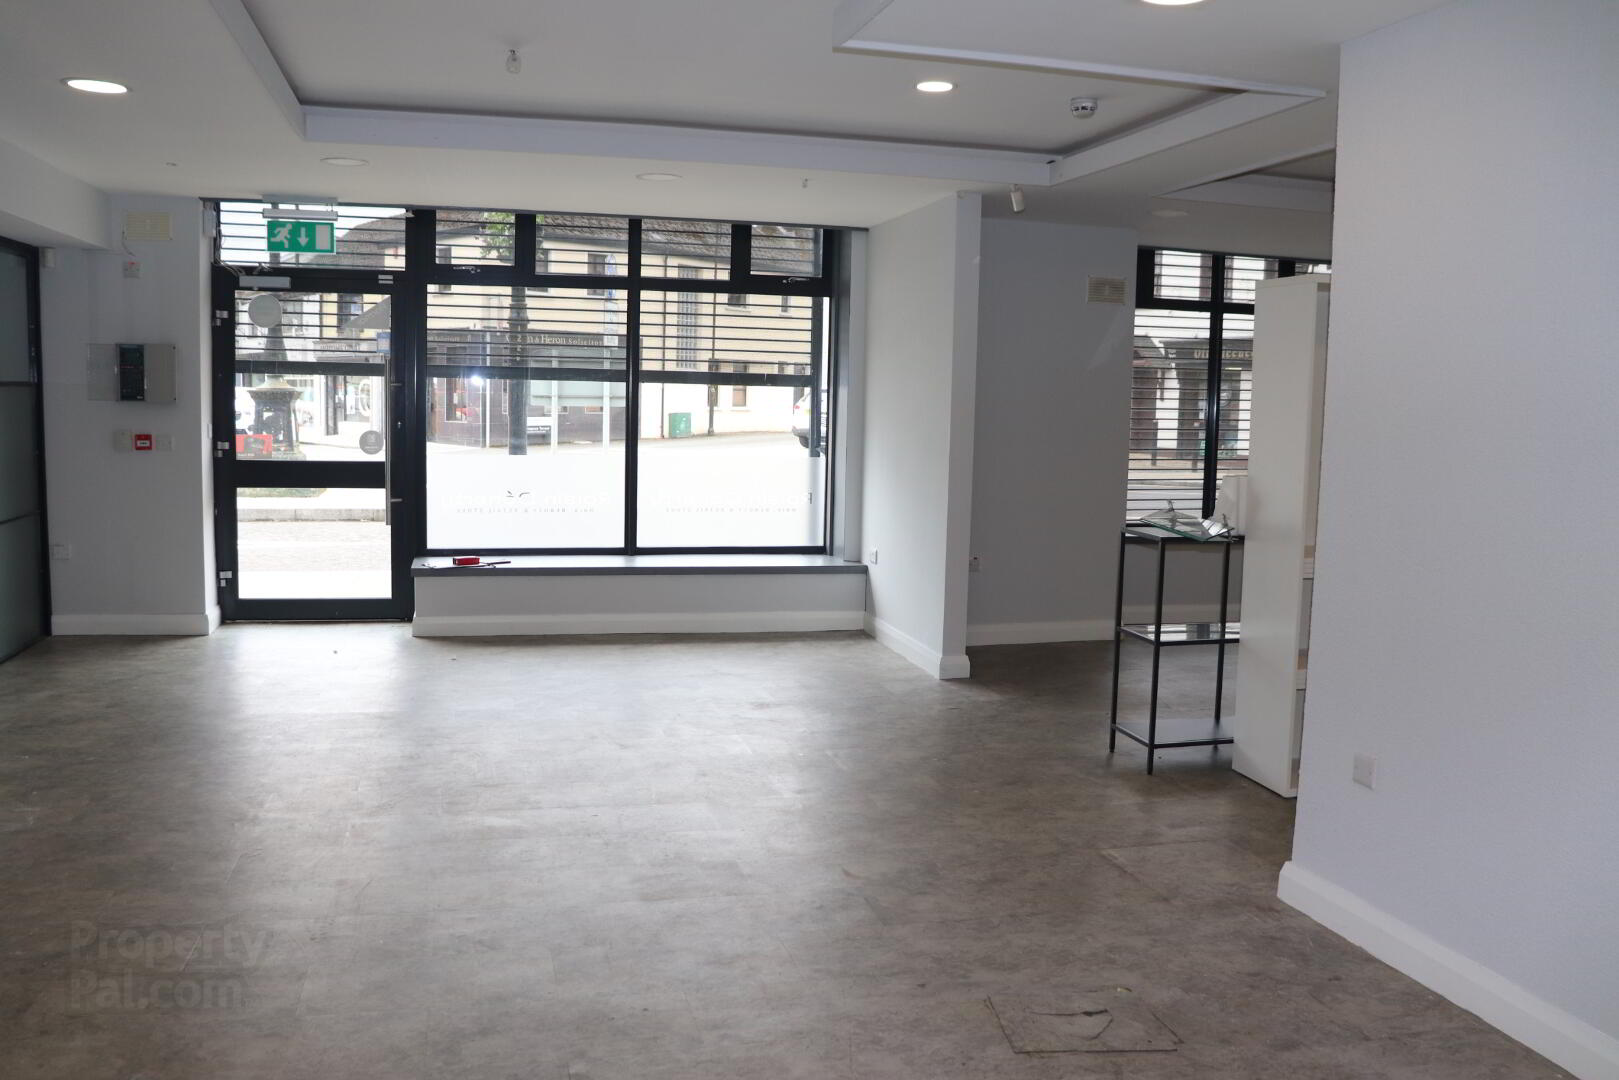 GROUND FLOOR Commercial Unit To Let, 6-8 The Square